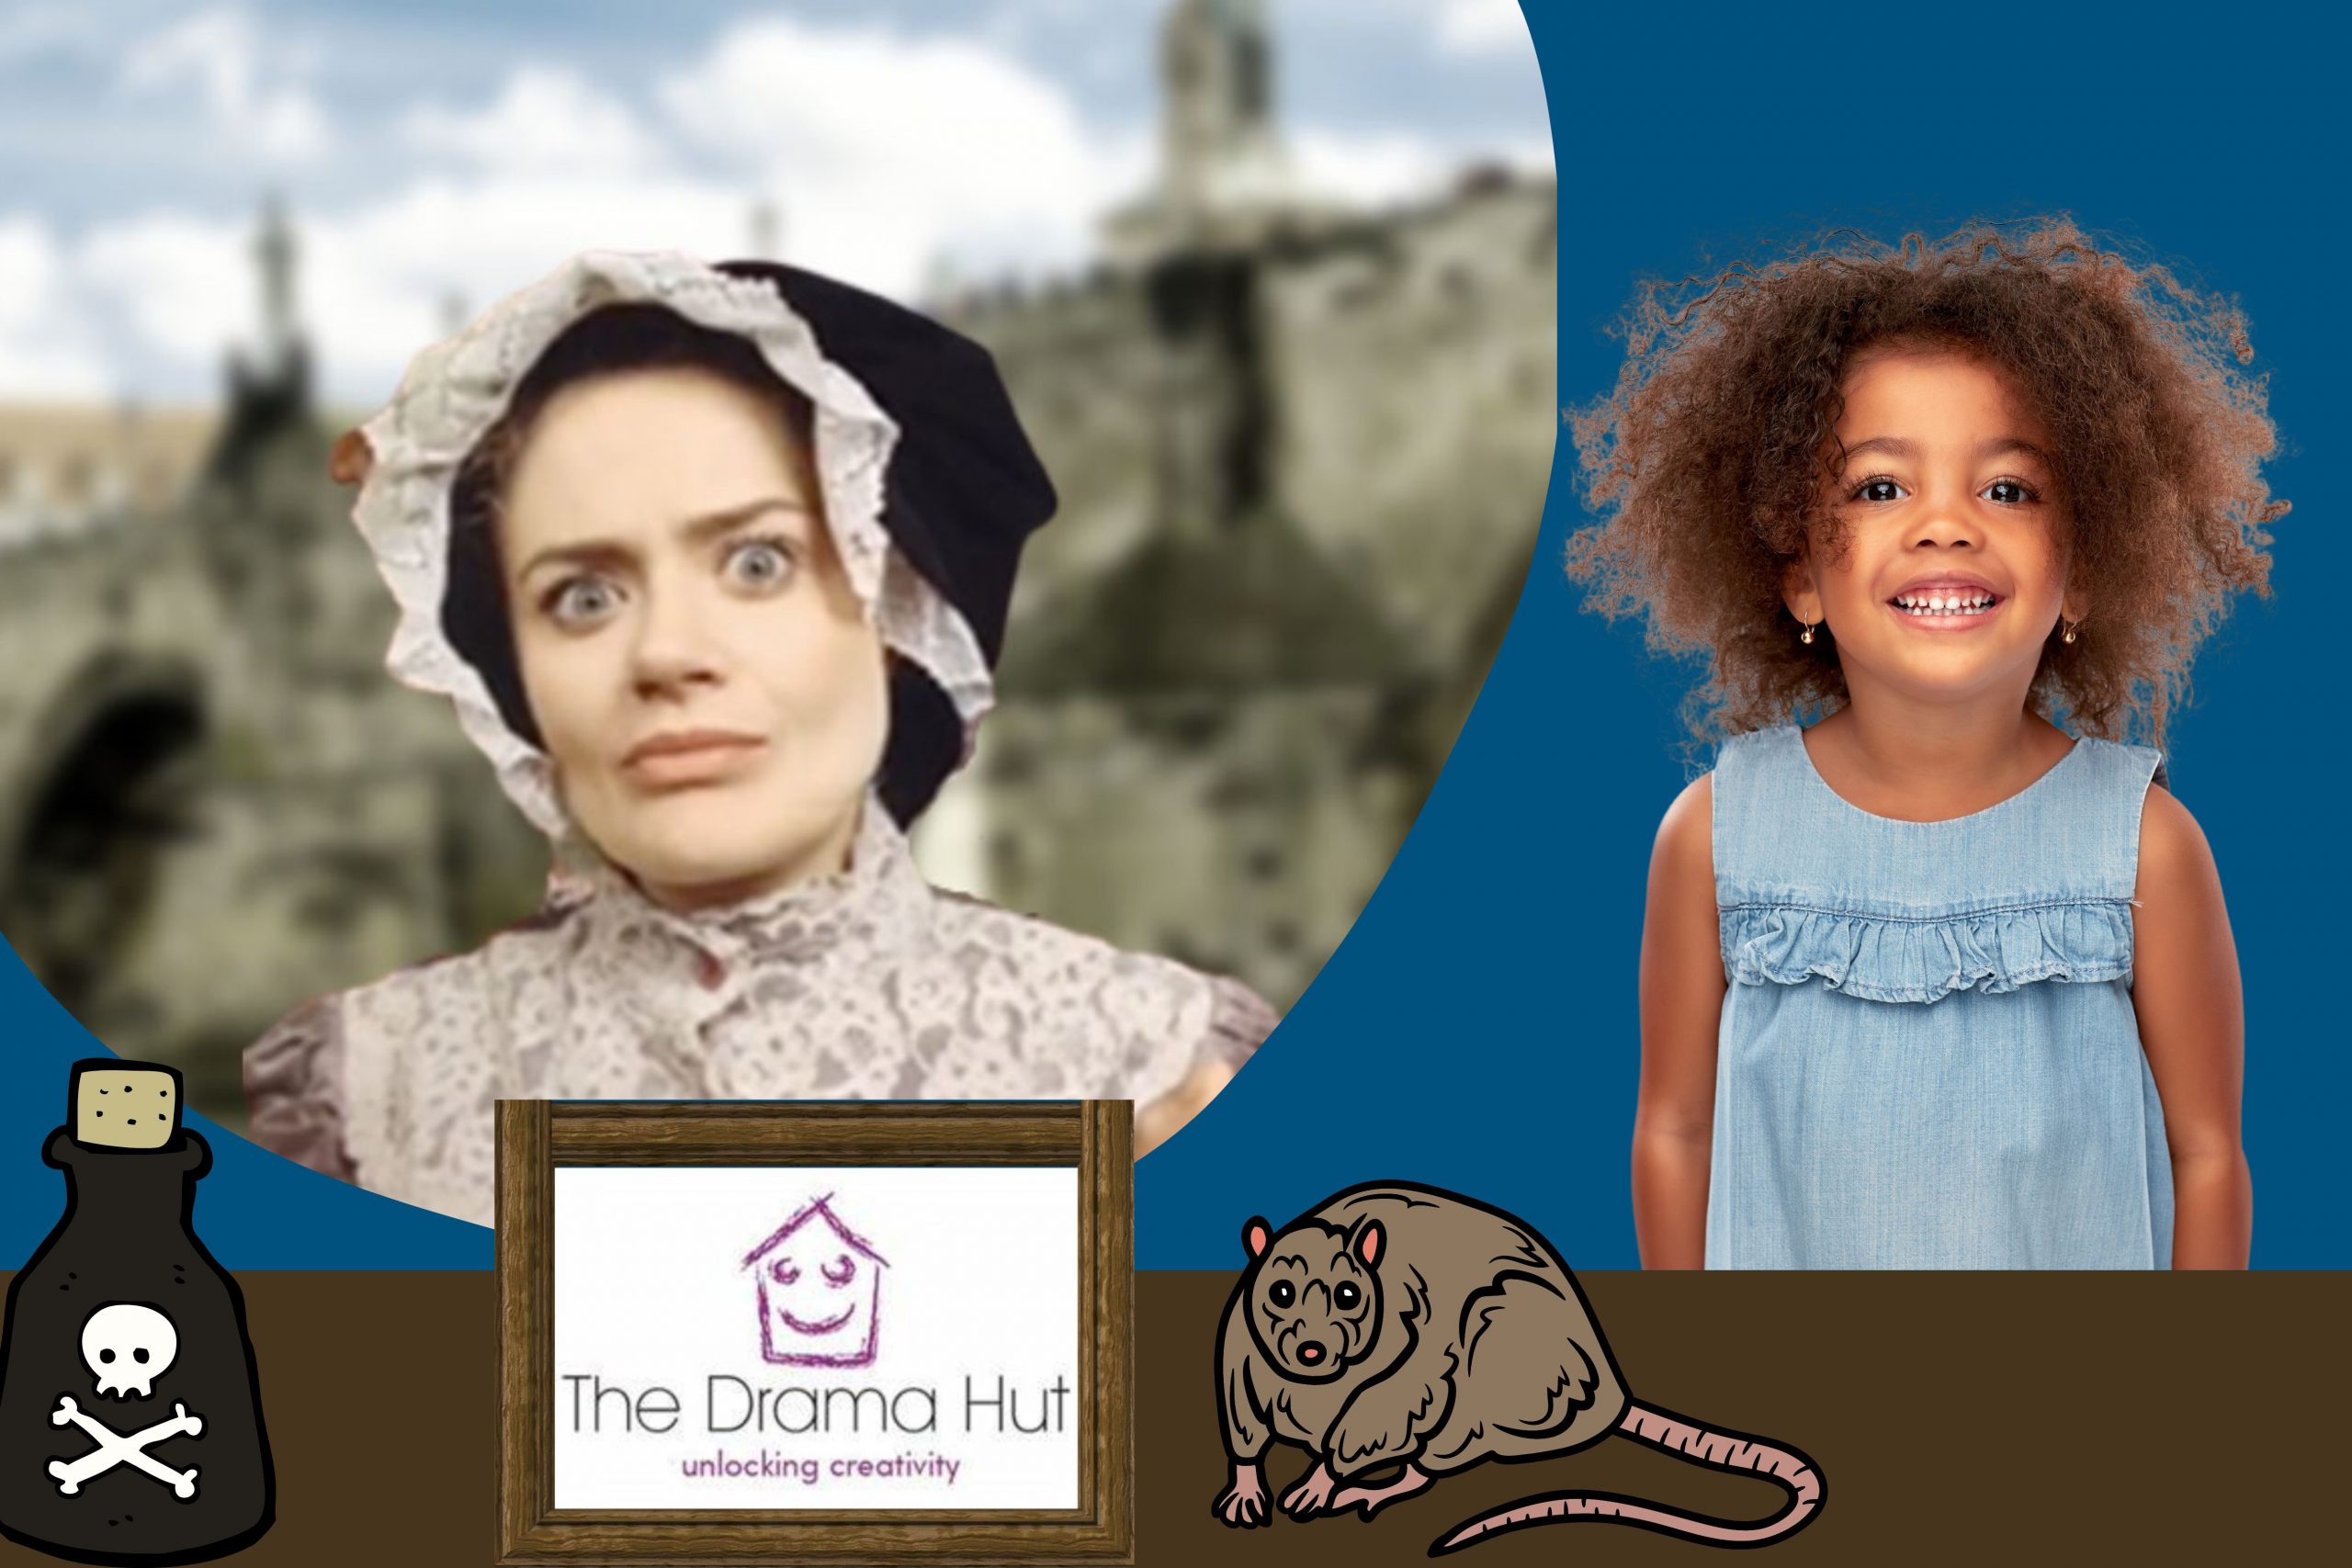 A stern Victorian Matron glares out of a bubble over a blue background. In the foreground, a small smiling girl, a cartoon rat and poison bottle and a framed image of The Drama Hut's logo.